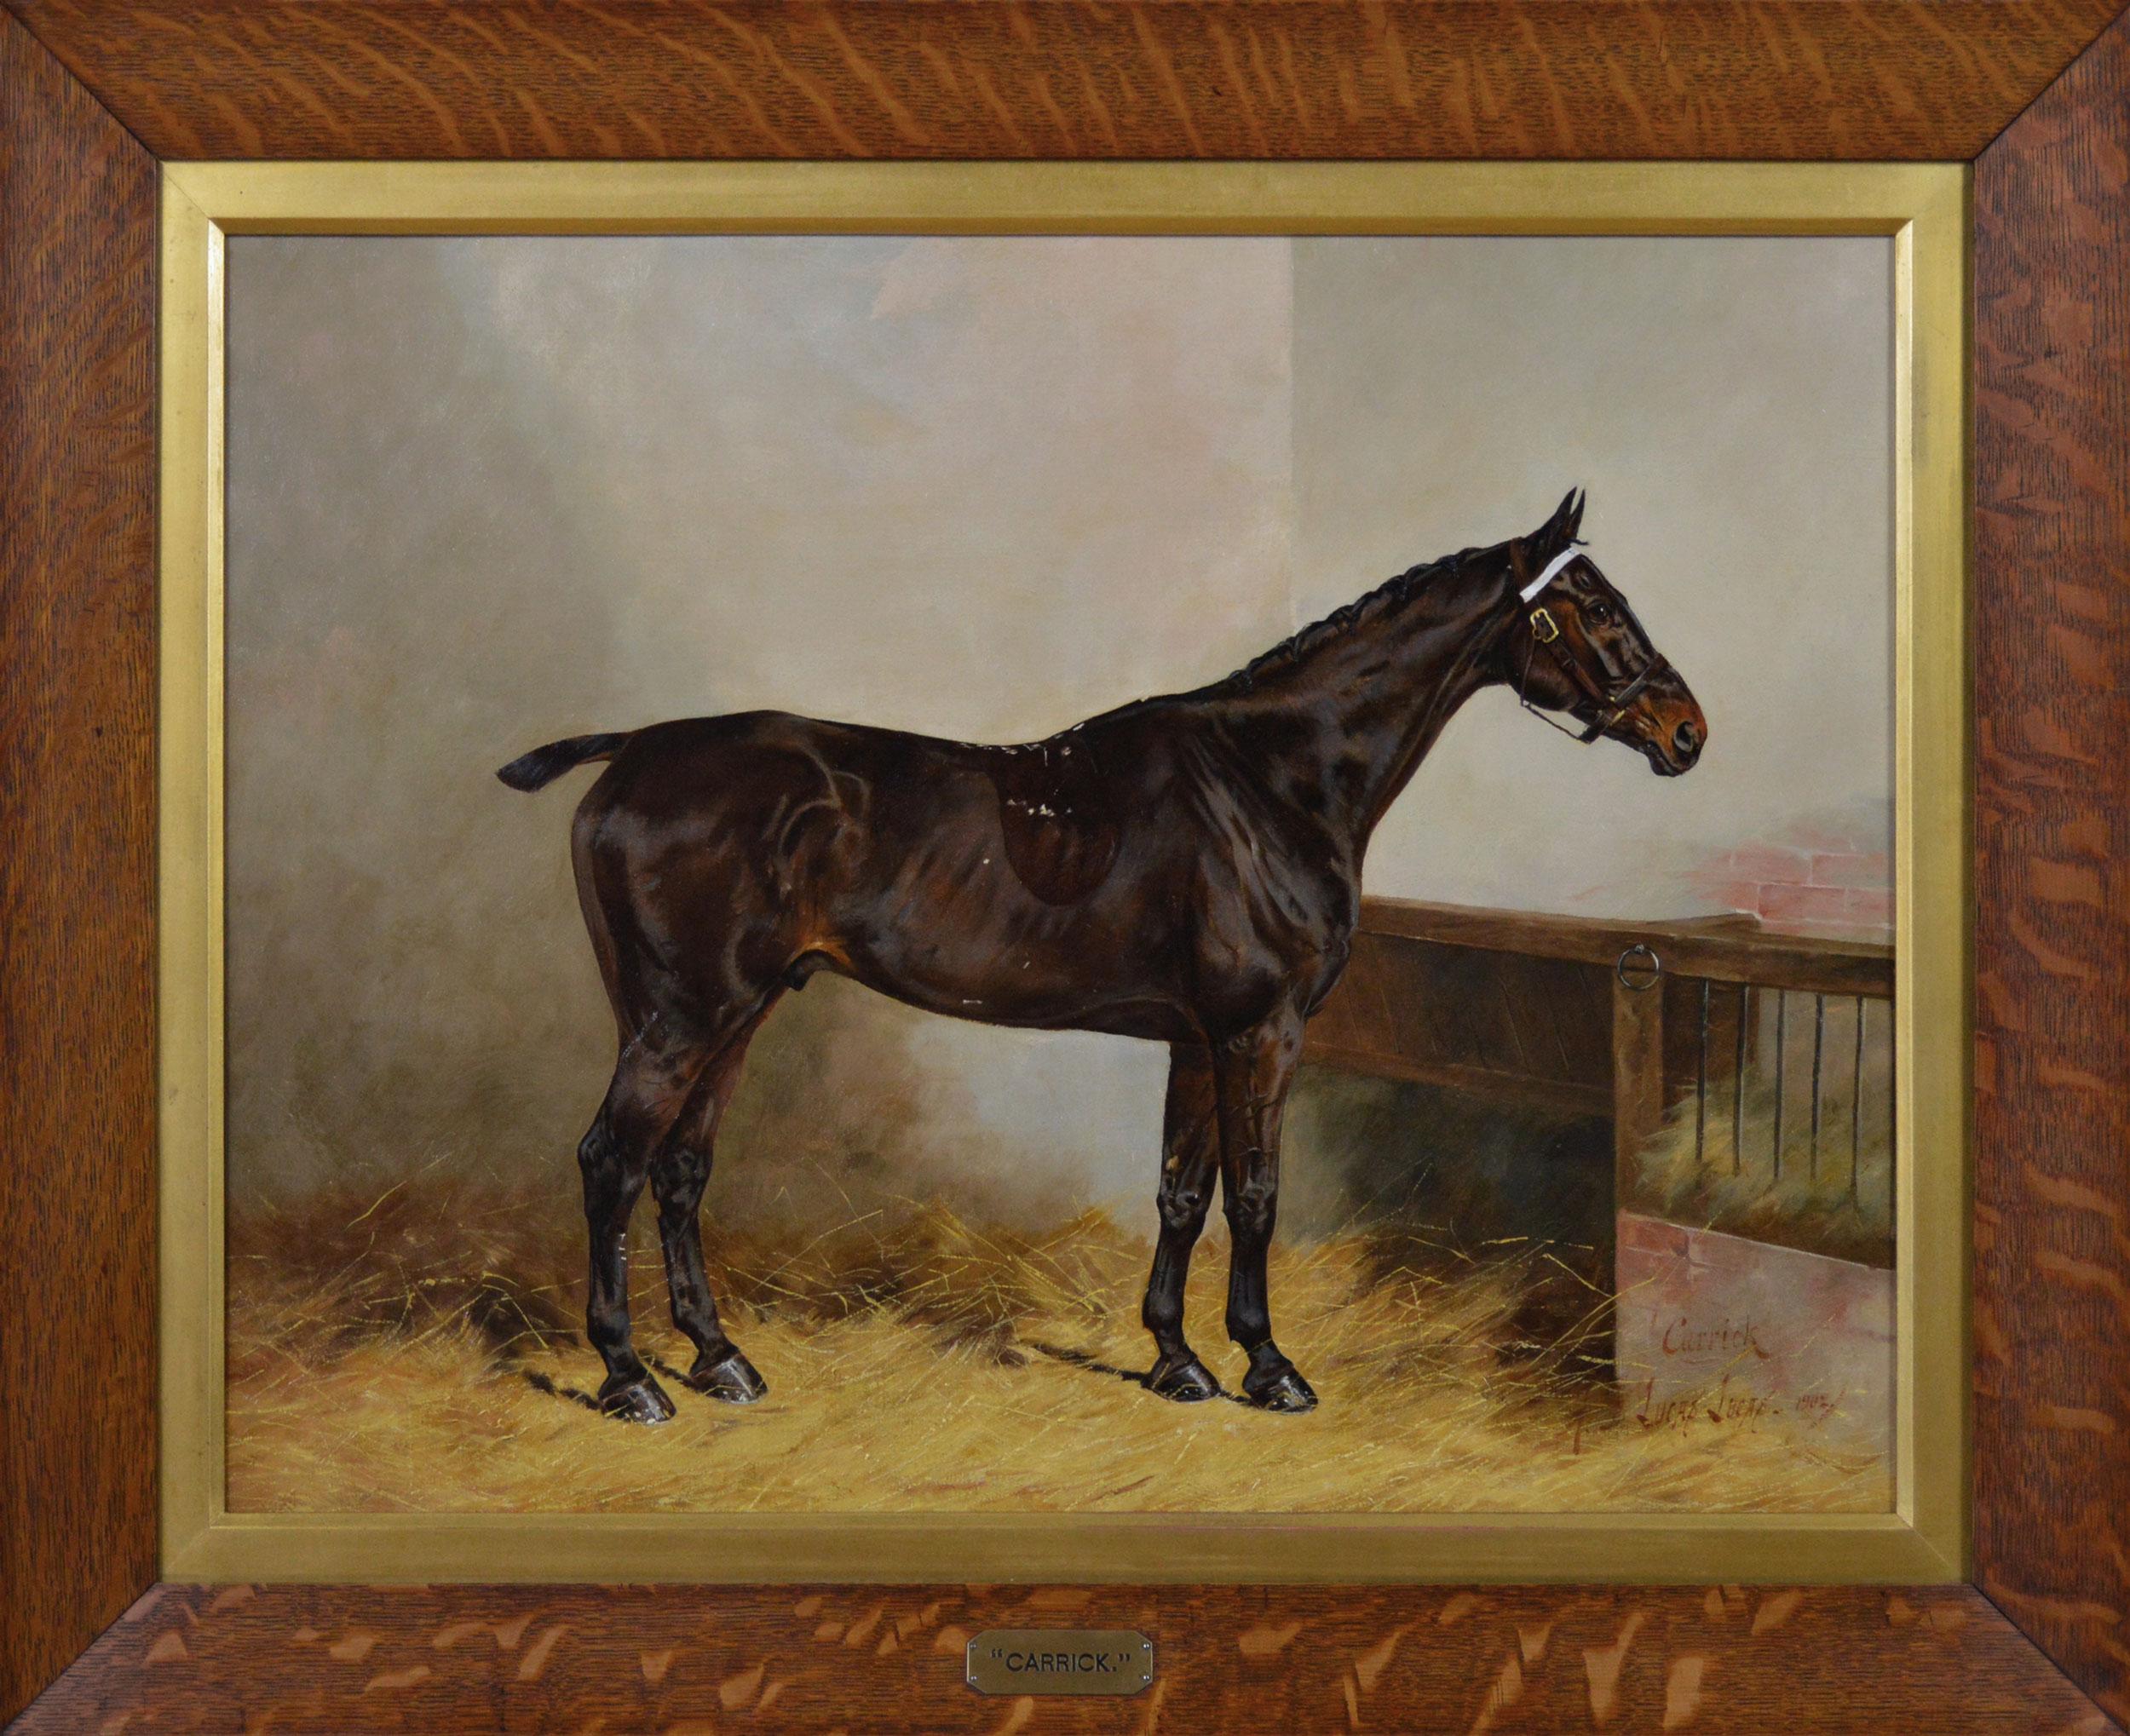 Henry Frederick Lucas Lucas  Animal Painting - Horse portrait oil painting of a dark brown stallion 